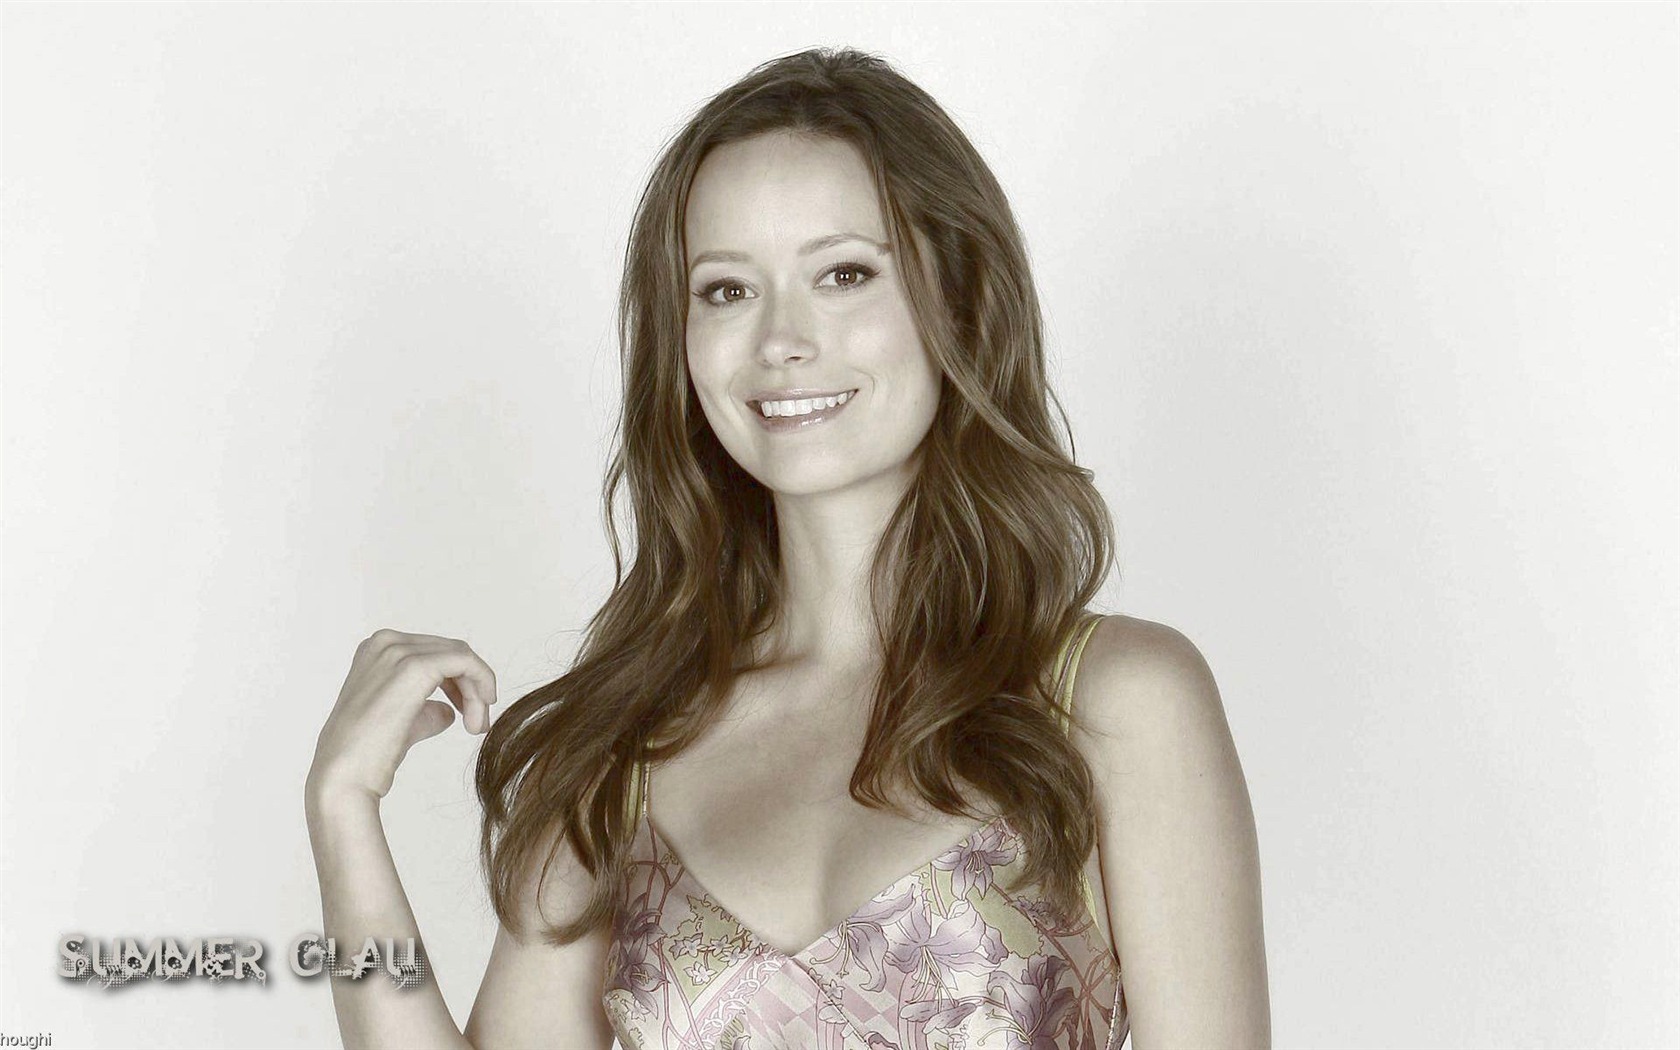 Summer Glau #011 - 1680x1050 Wallpapers Pictures Photos Images